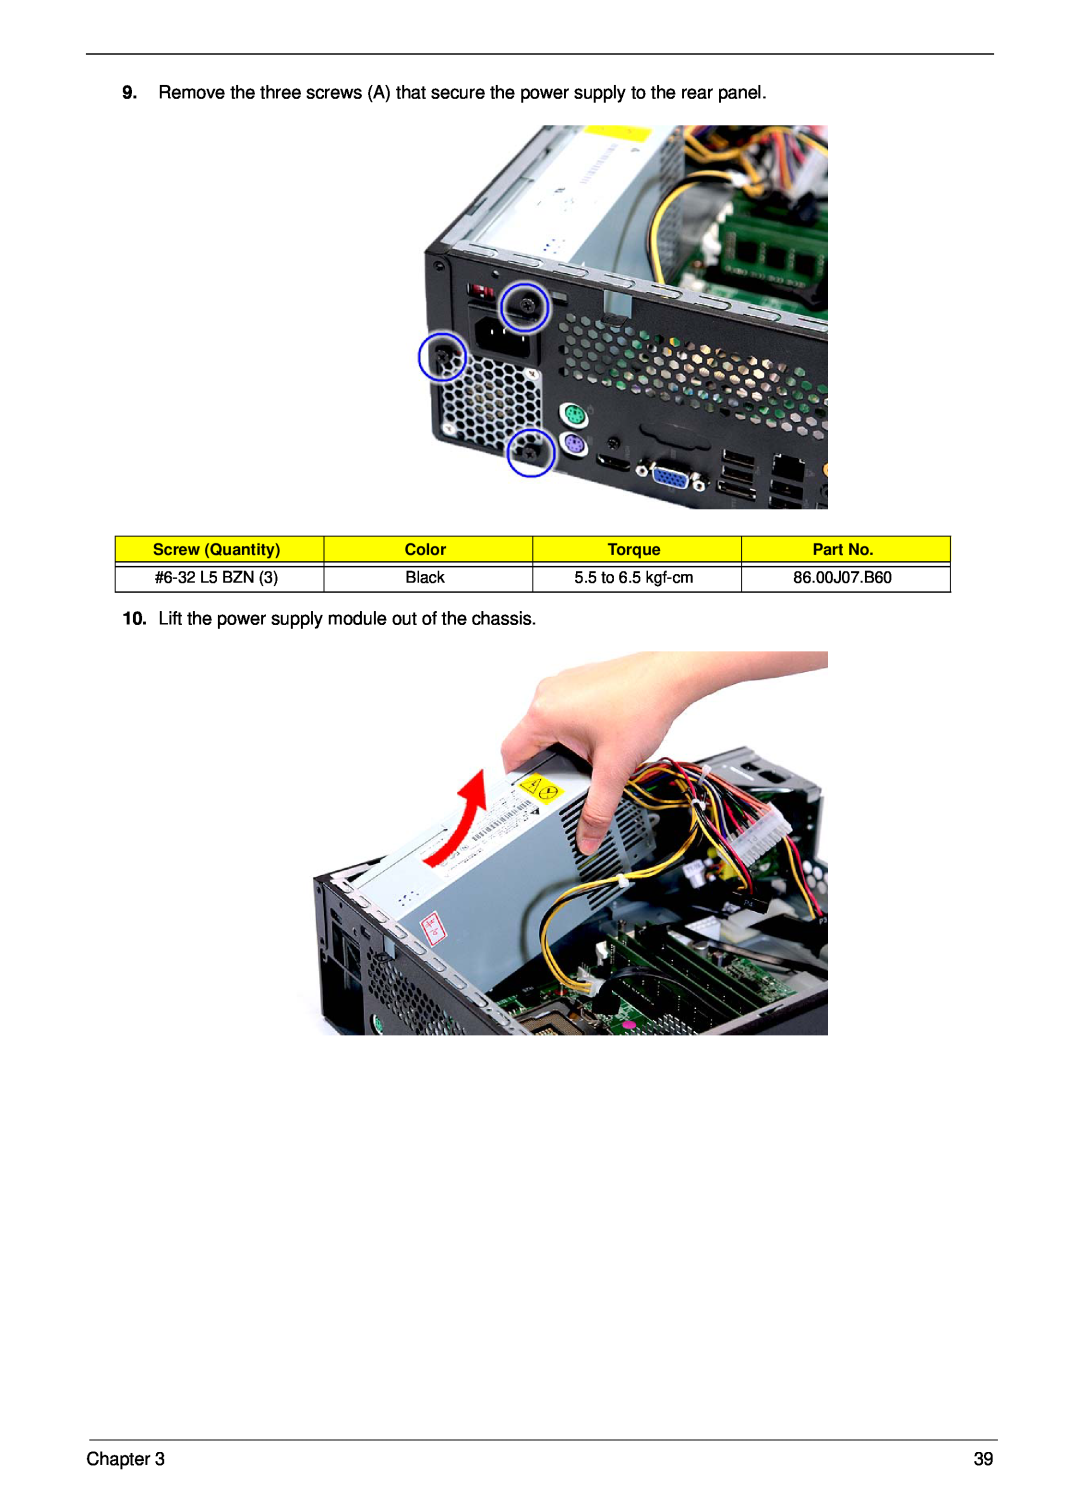 Acer X5812 Lift the power supply module out of the chassis, Chapter, Screw Quantity, Color, Torque, #6-32 L5 BZN, Black 